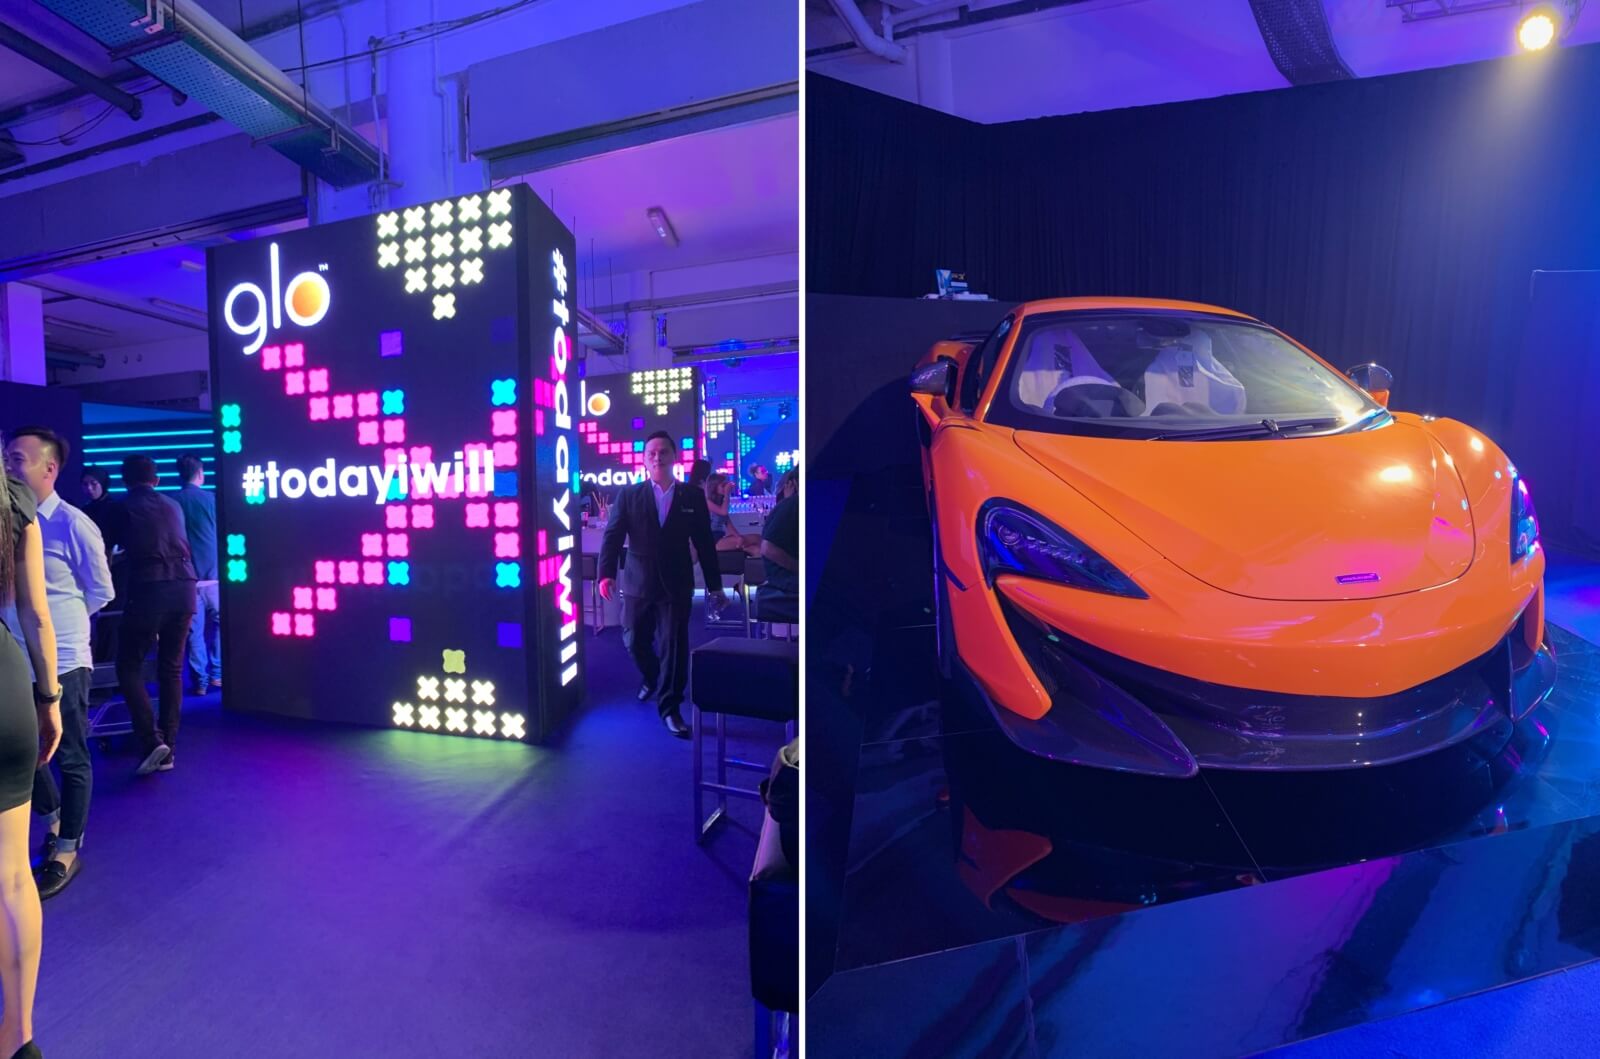 Hot Air Balloon Lifts, McLaren Car Rides and More: Glo Malaysia Threw The Sickest Party This 2019 - WORLD OF BUZZ 14